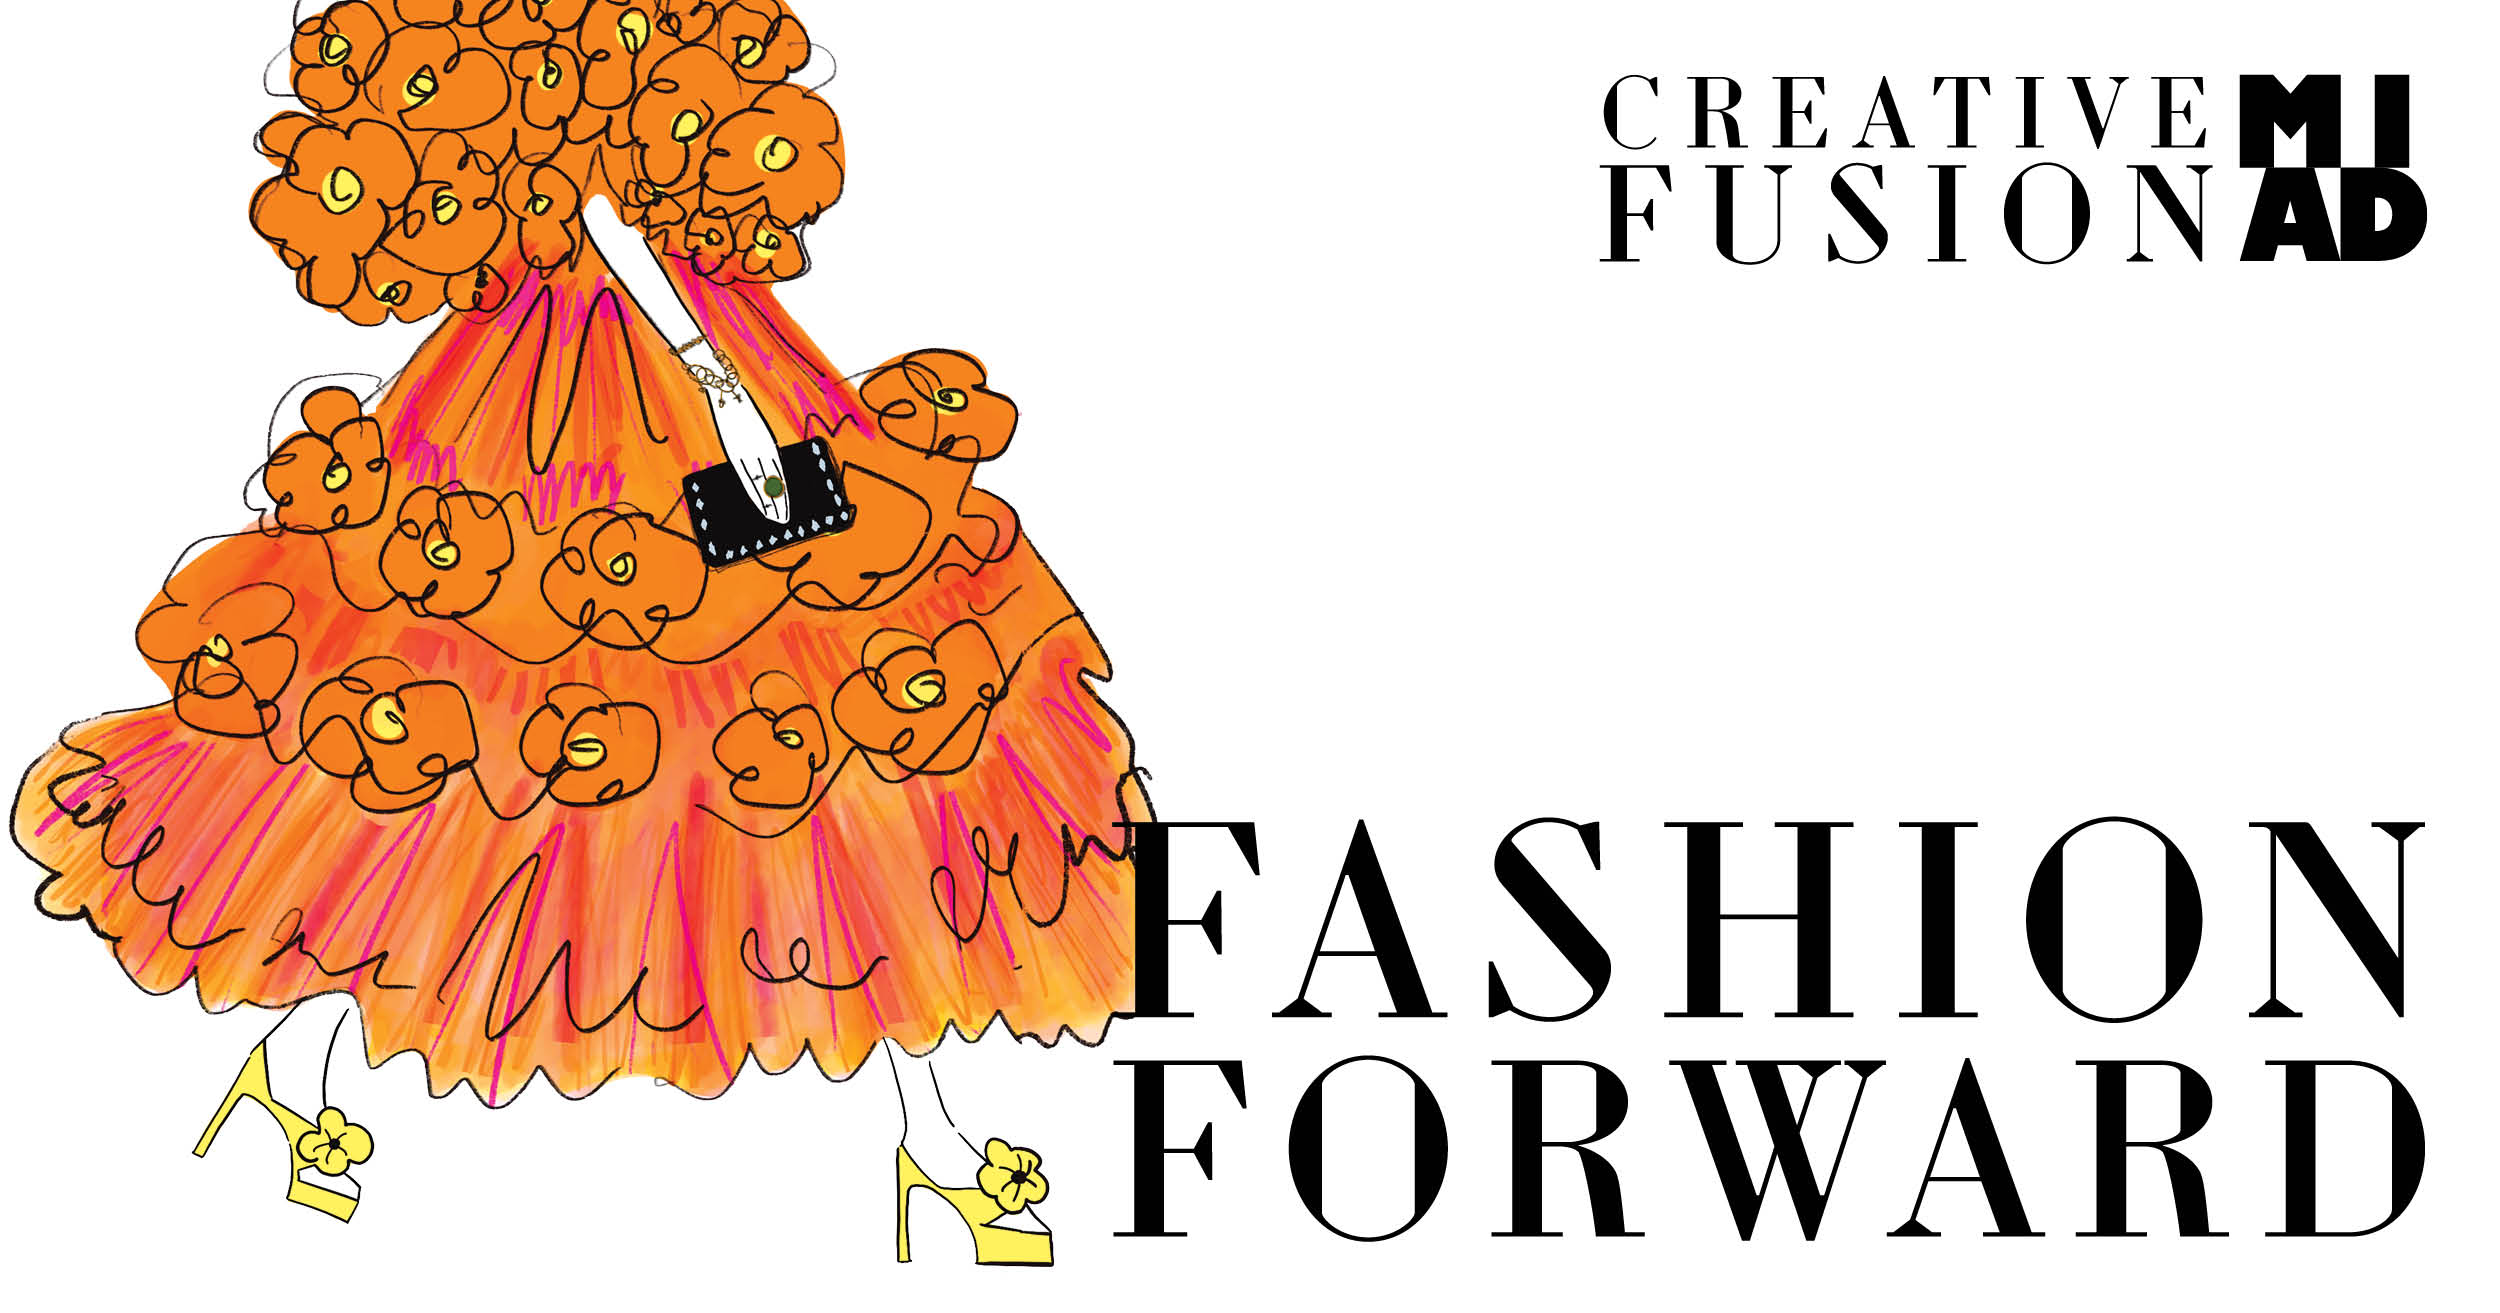 Students! Sell your work at Creative Fusion by March 31